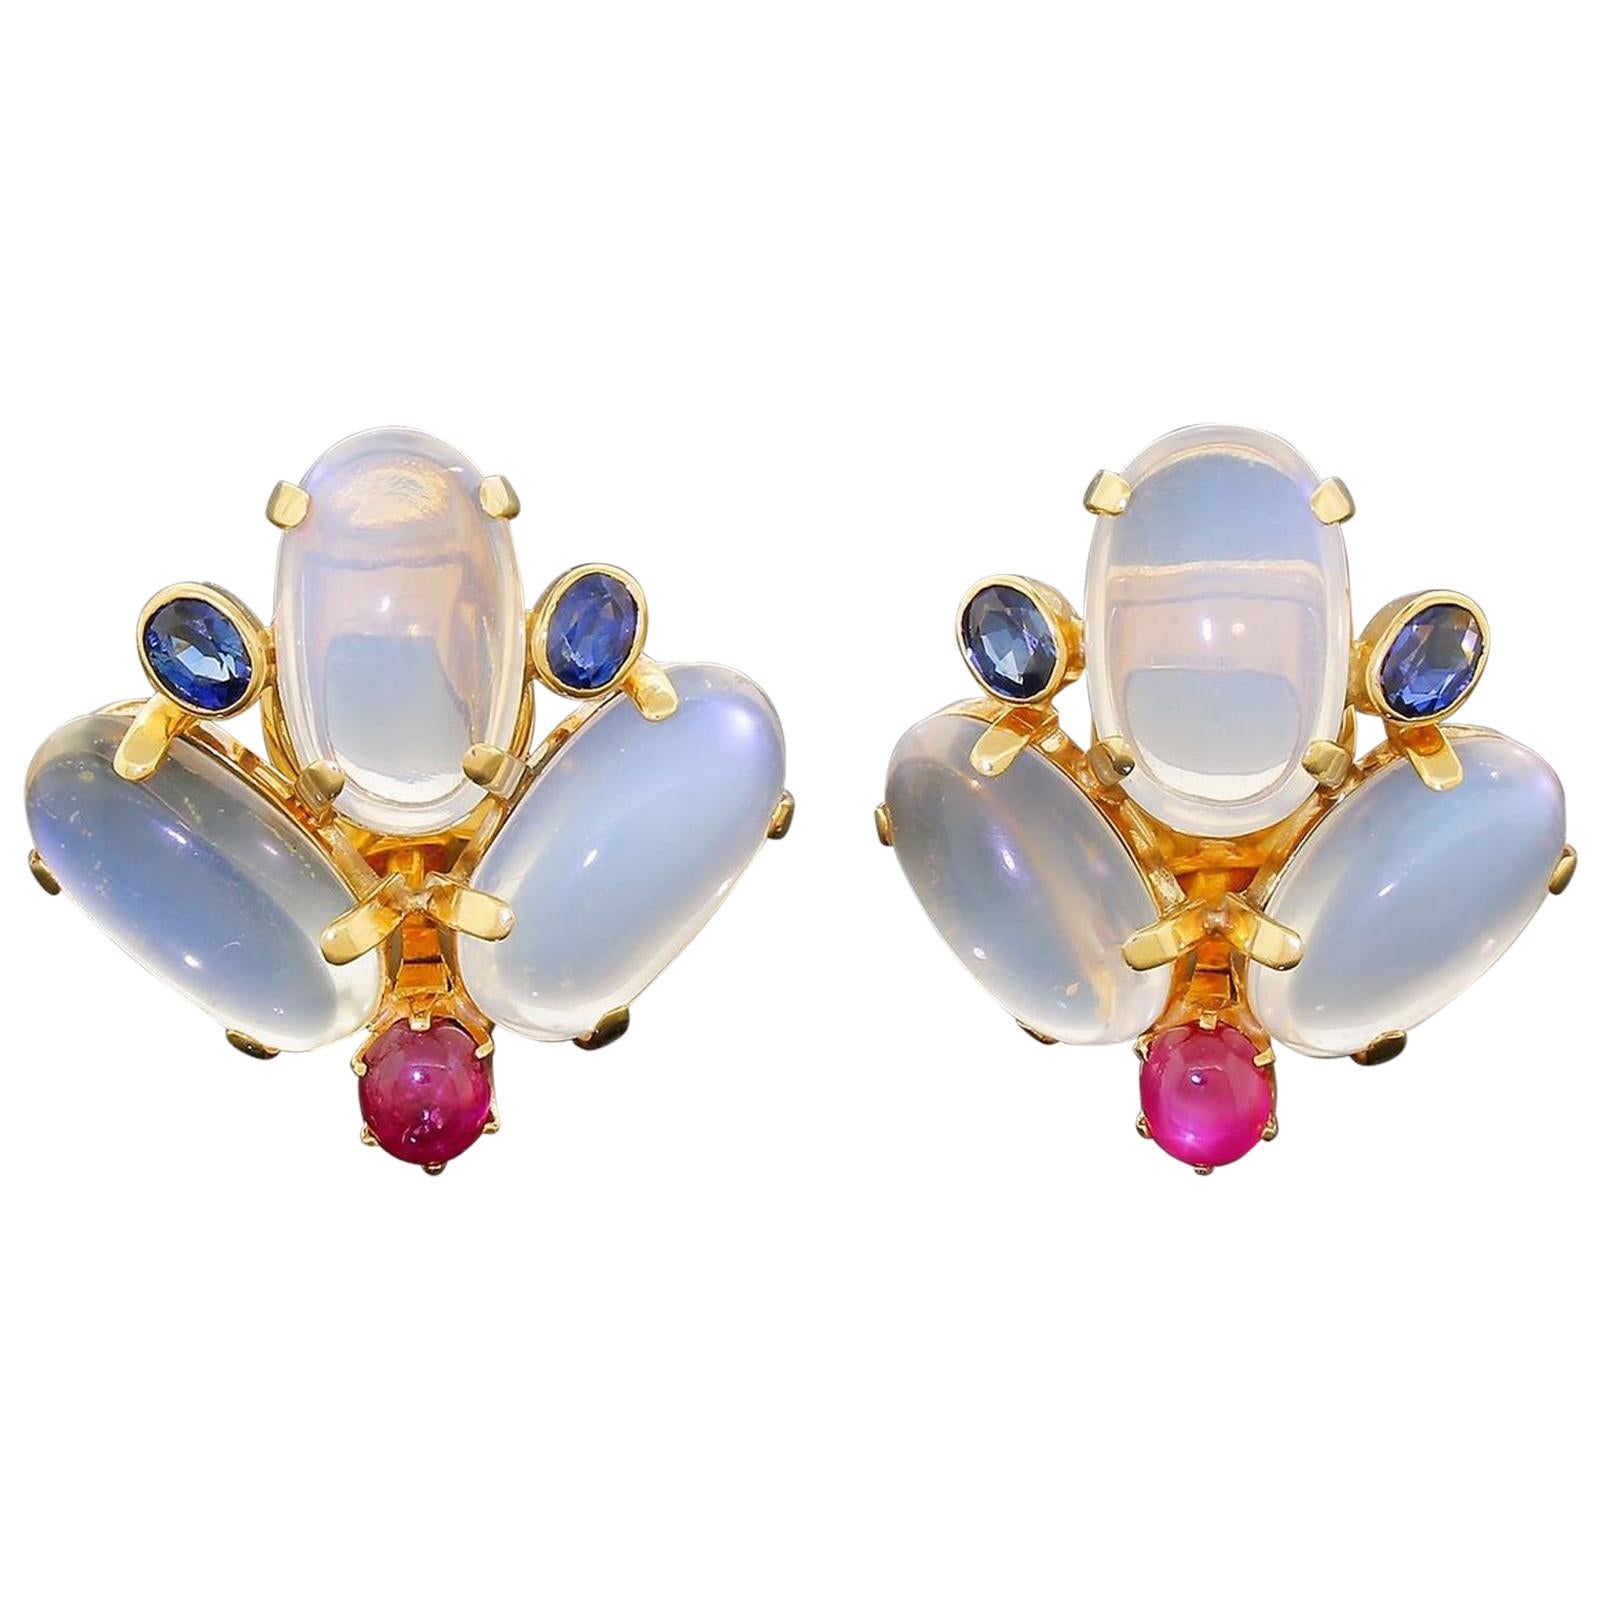 Equisite Large 14k Gold Moonstone Clip On Earrings with Ruby Sapphire Cabochons